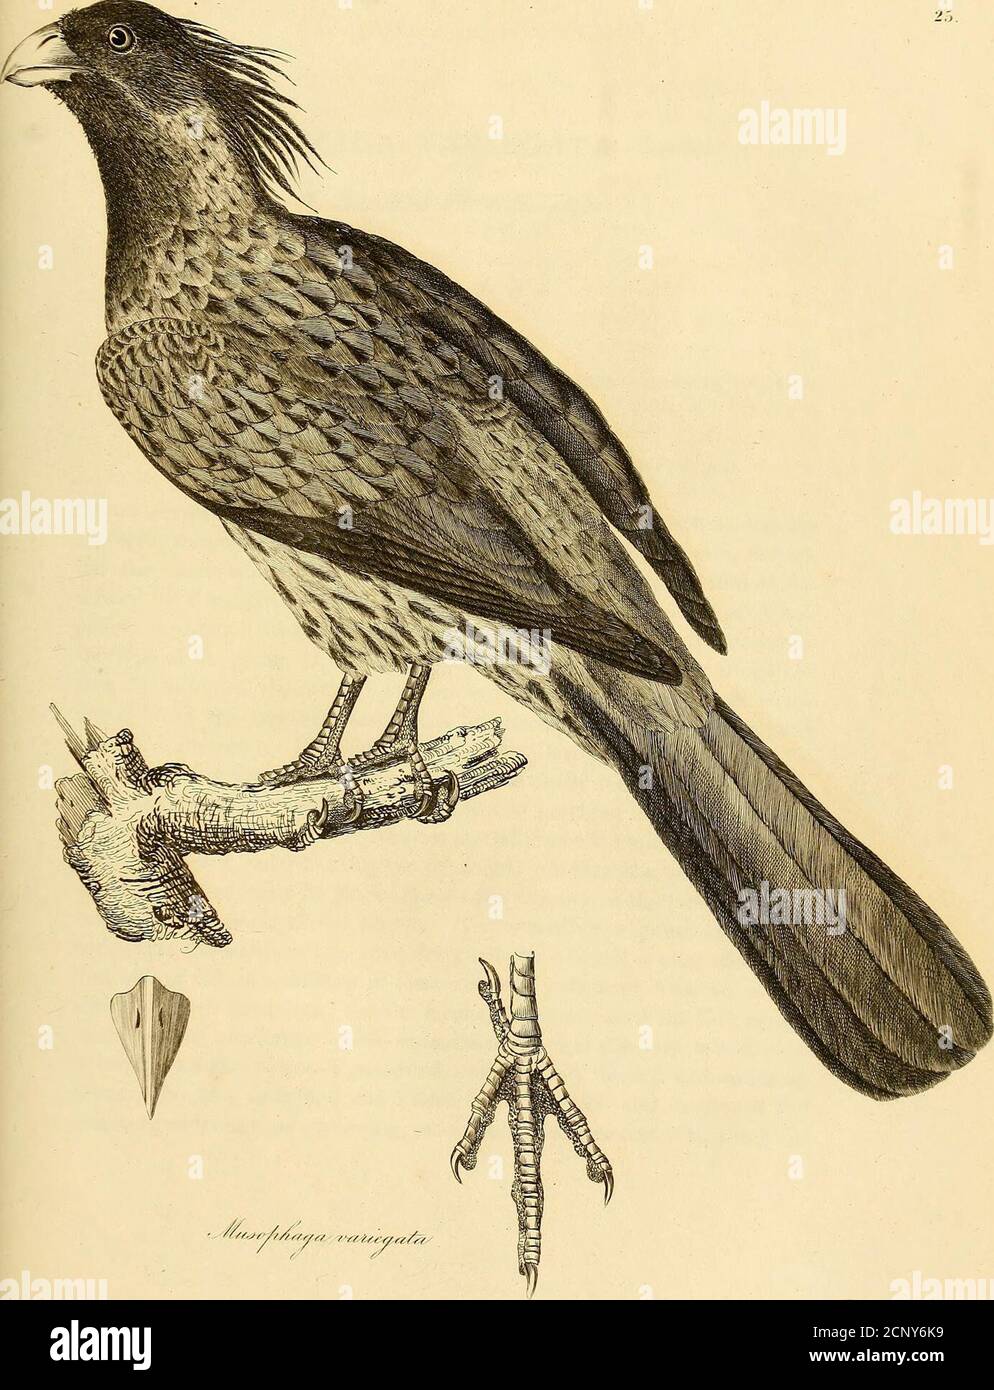 . Illustrations of ornithology . MUSOPHAGA VARIEGATA, Vieillot.Variegated Plantain-eater. PLATE XXV. M. supra grisea, brunneo maculata, subtus alba nigrescente-castanea striata, ca-pite crista occipitali. Musophaga variegata, Vieill. Gal. des Ois. PL 48. Le Musophage varie, 2de. edit, du Nouv. Diet. dHist. Nat. tome xxii. p. 92. J  his elegant Musophaga has long been known in our museums, but hashitherto remained undescribed by British naturalists: it, however, fell un-der the observation of the continental ornithologists, and we find it de-scribed by Vieillot in his Gallerie des Oiseaux, unde Stock Photo